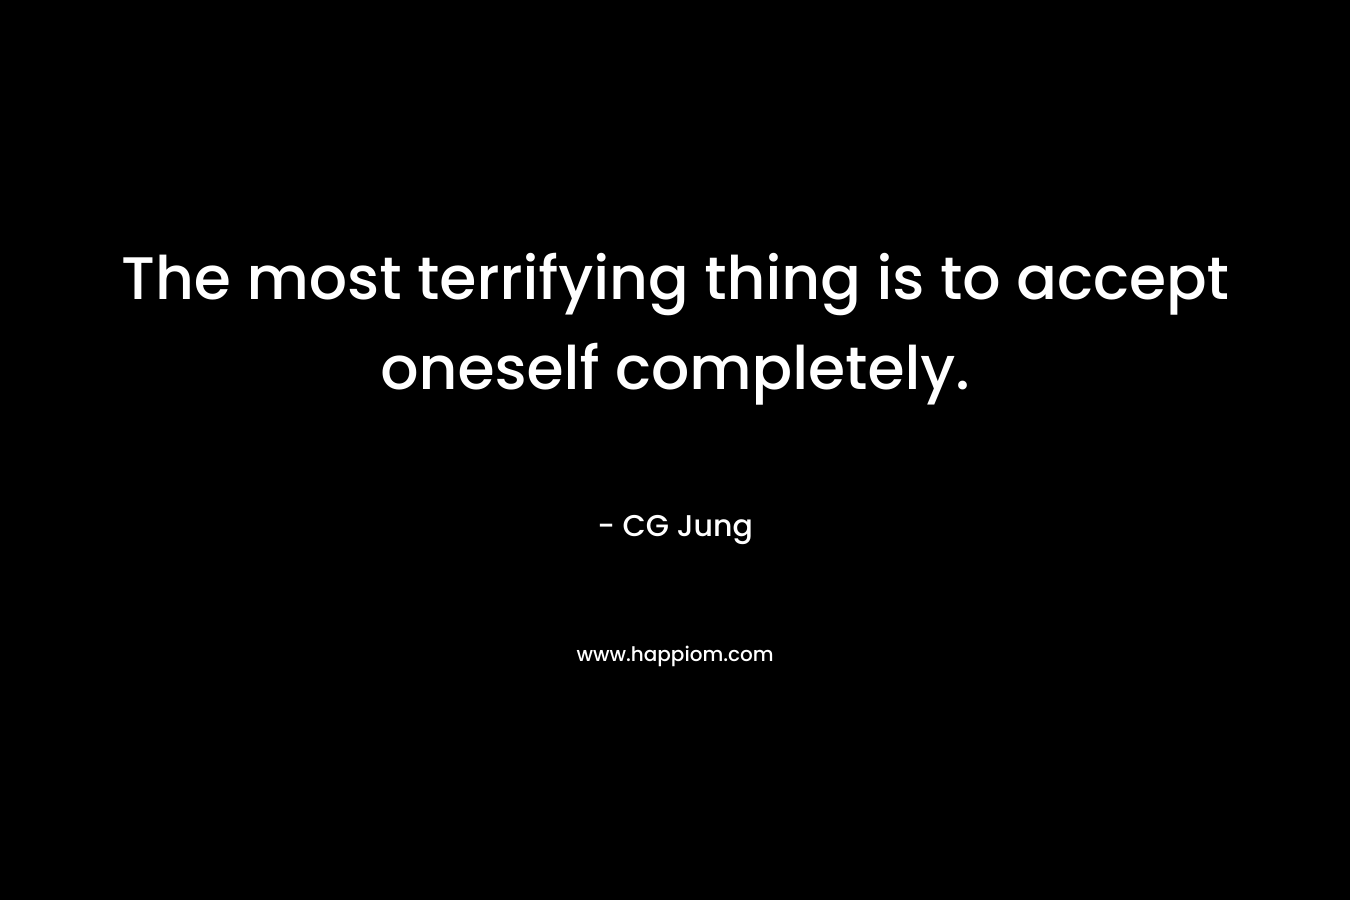 The most terrifying thing is to accept oneself completely. – CG Jung